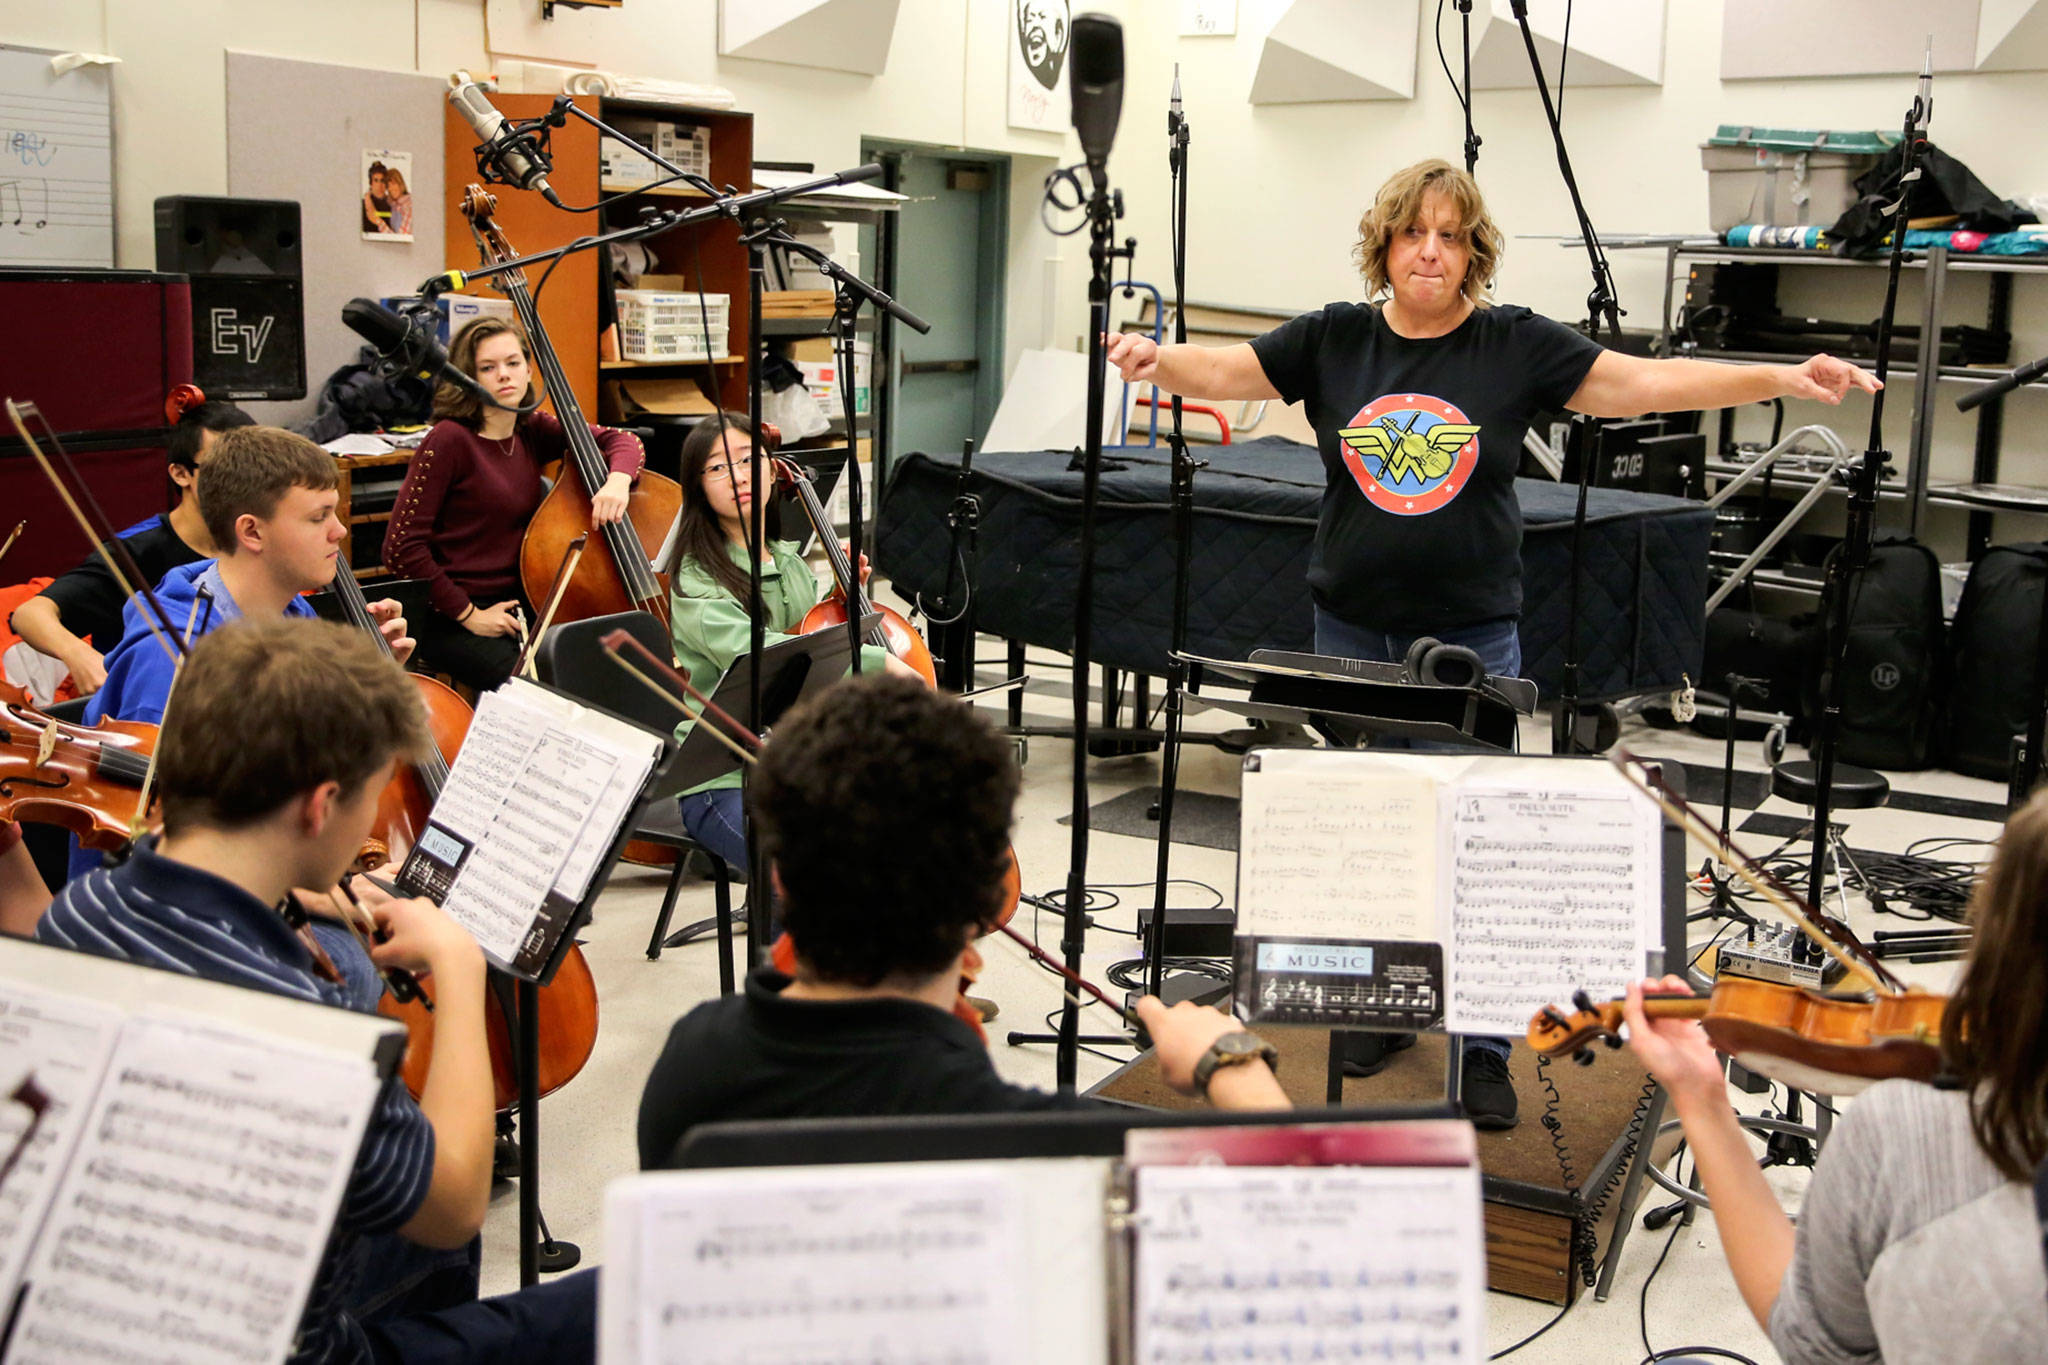 Jennifer Schillen leads the Mountlake Terrace High School Chamber Orchestra through a rehearsal before recording at Edmonds Community College. (Kevin Clark / The Herald)